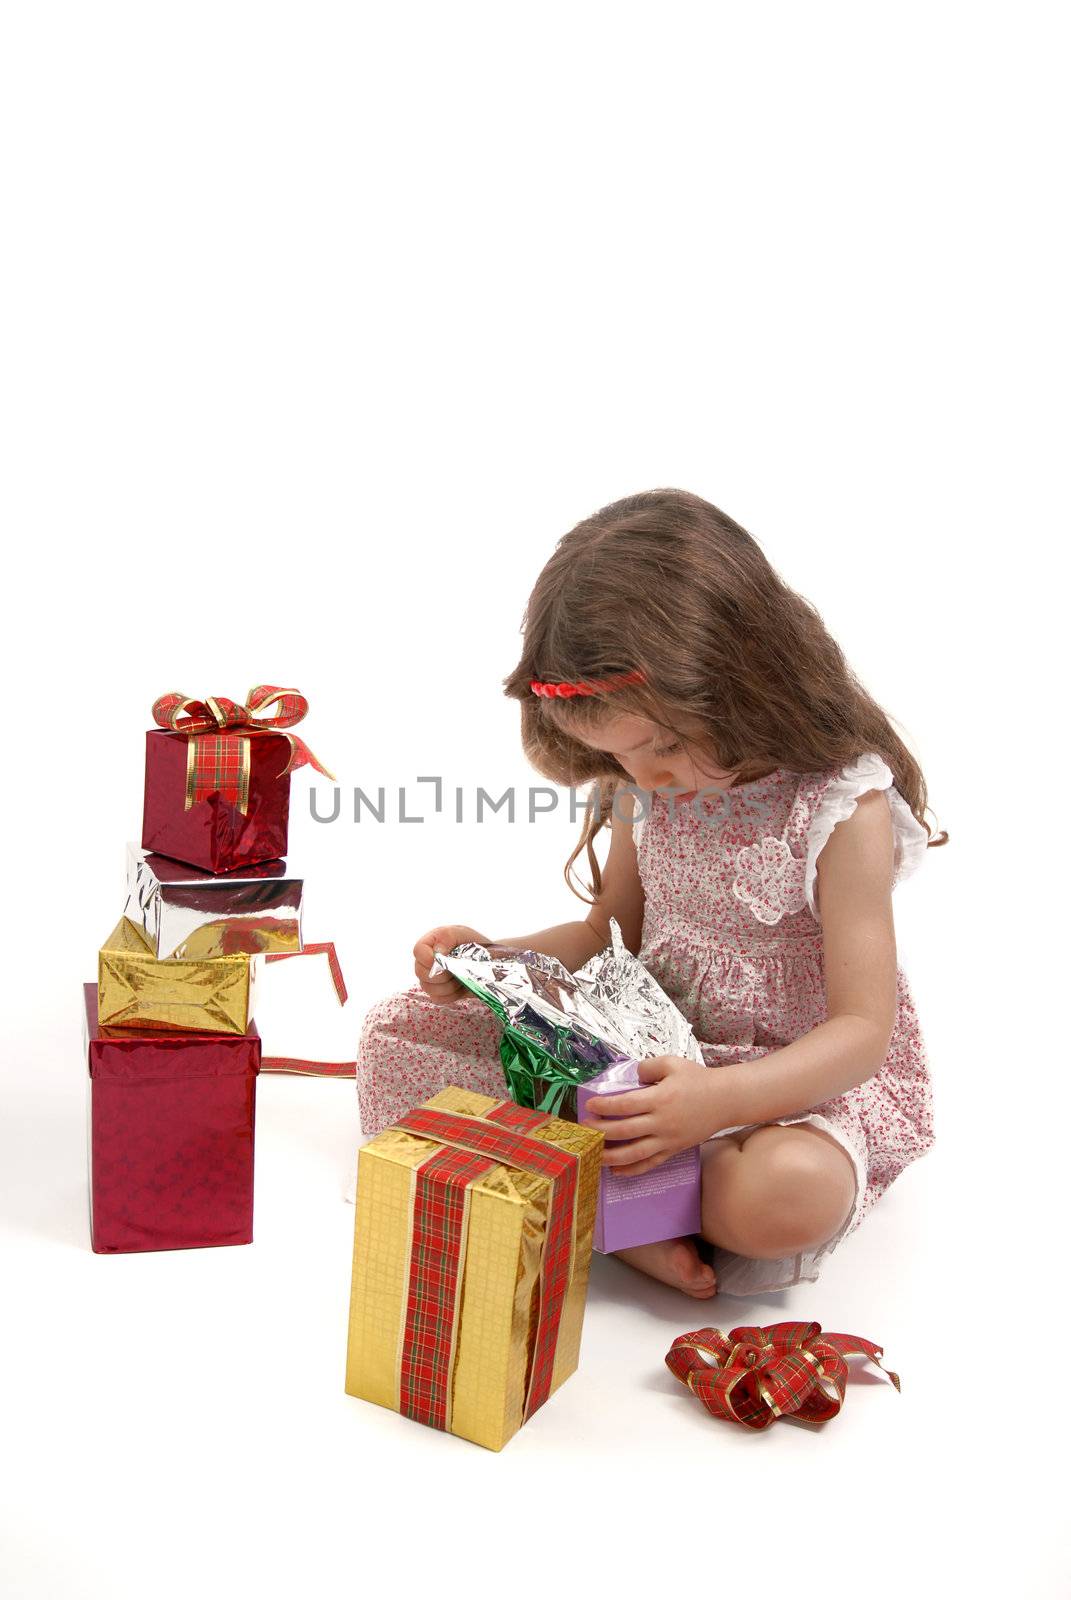 Little girl opening her Christmas presents. White background